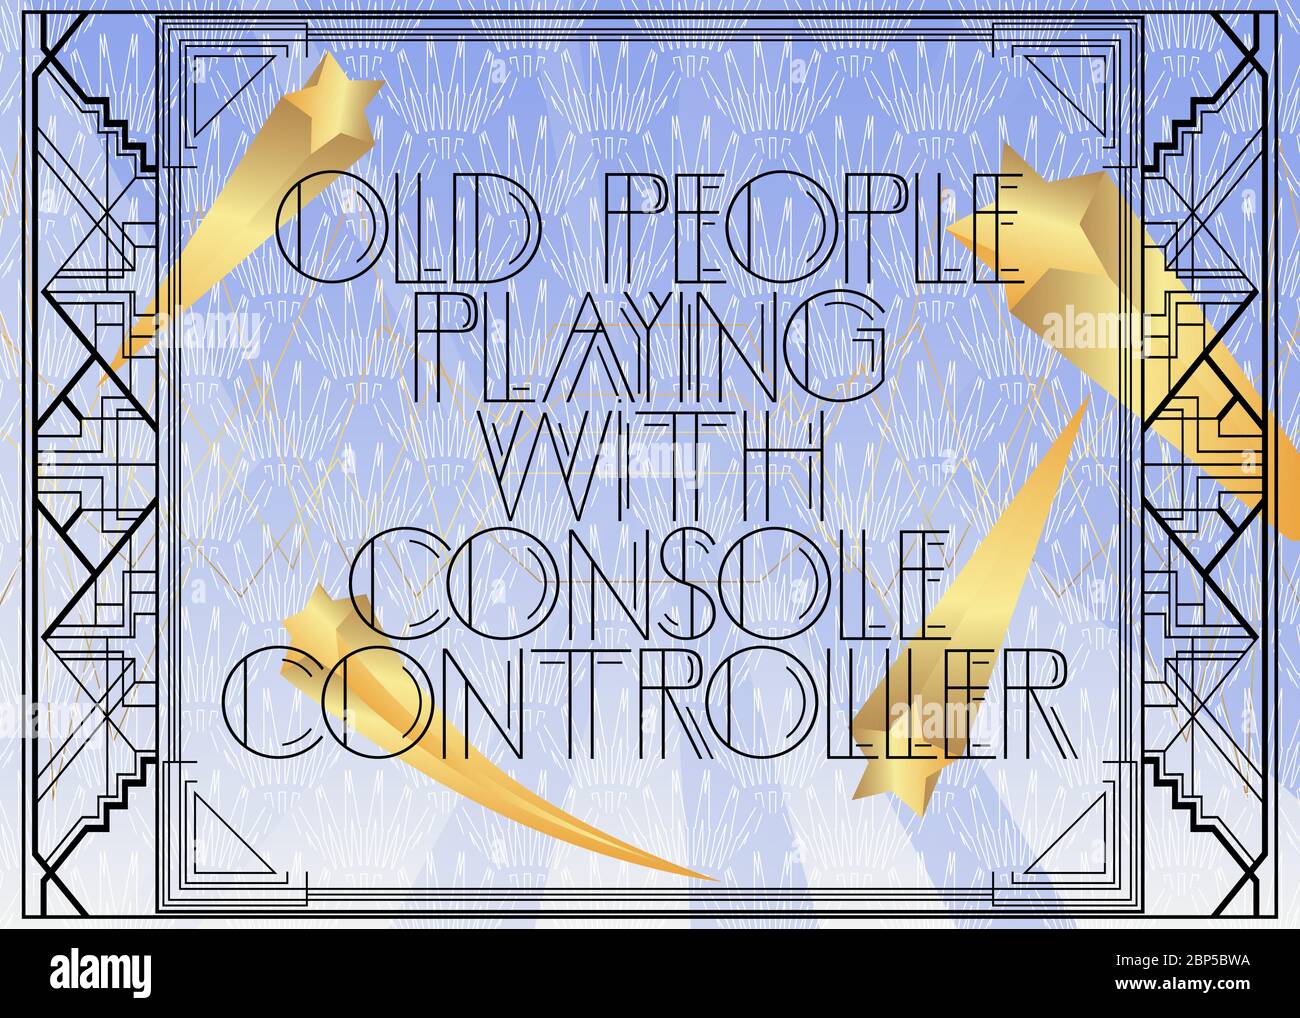 Art Deco Old people playing with console controller text. Decorative greeting card, sign with vintage letters. Stock Vector